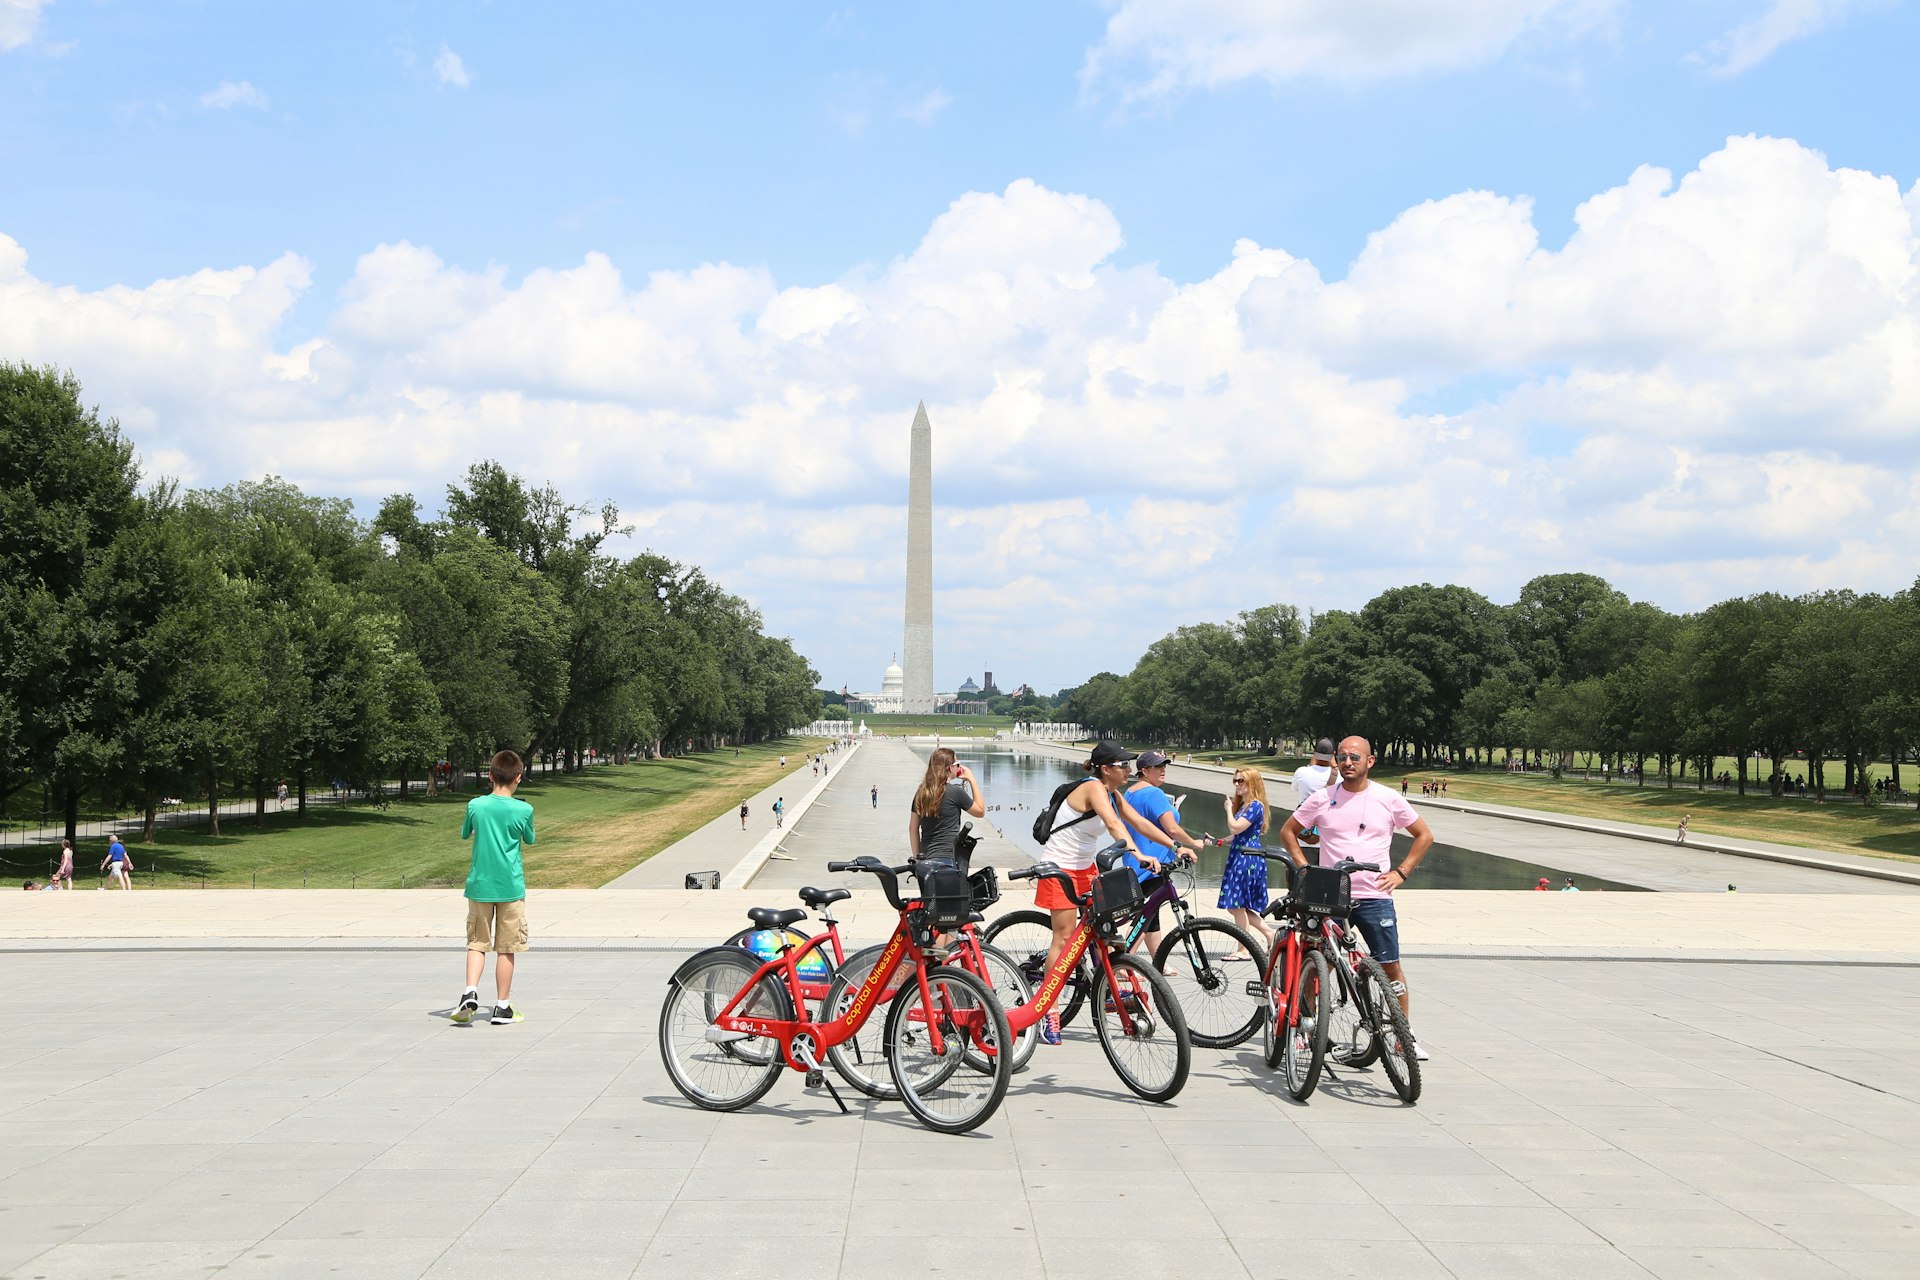 A group of people on bikes take a break while biking around the National Mall in Washington, DC. In the background you can see the Washington monument